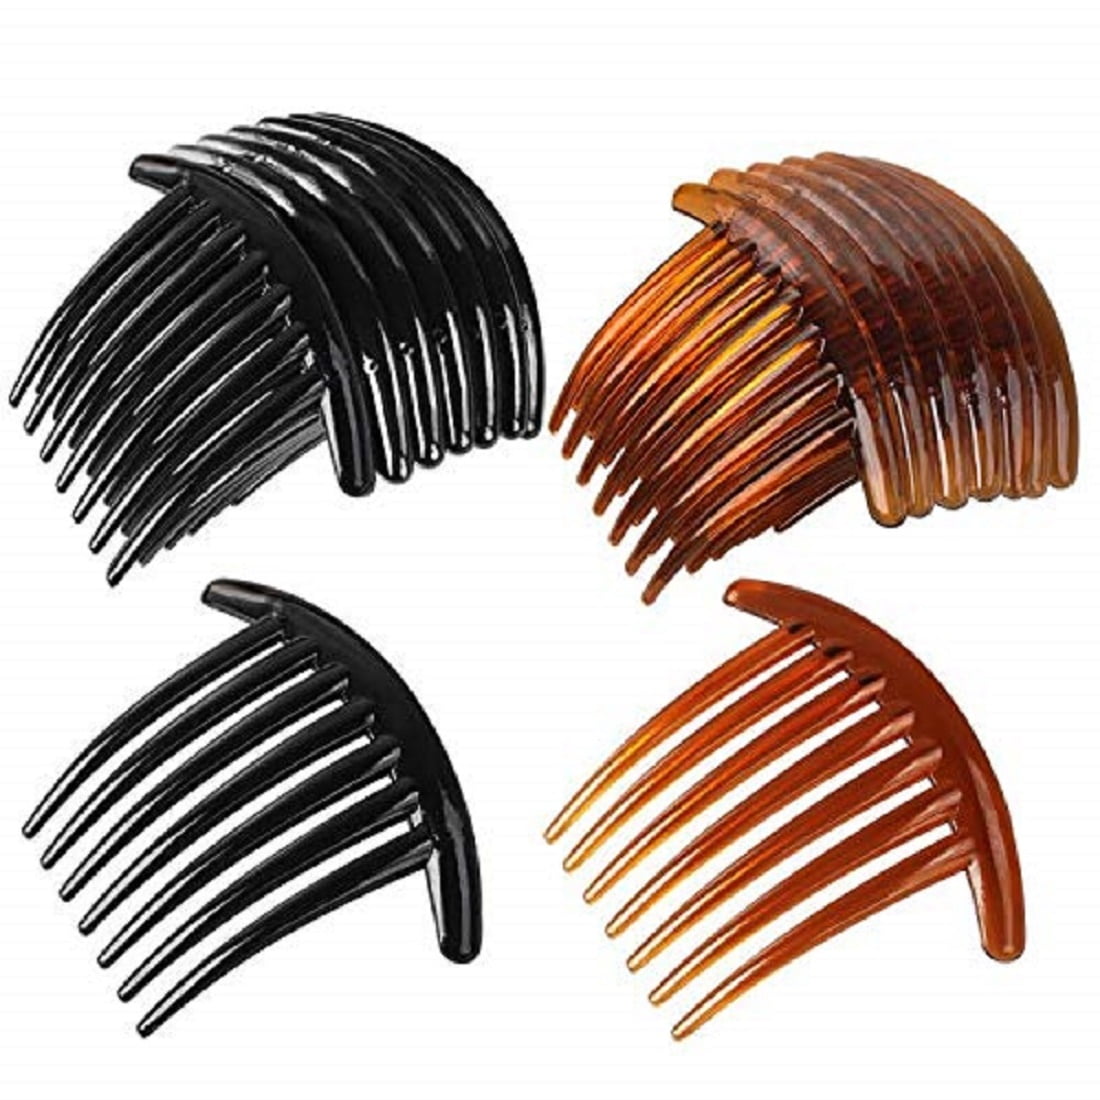 24 PCS 7 Tooth French Twist Comb Plastic Hair Side Combs Hair Accessory for  Women Girls (Black and Brown) 